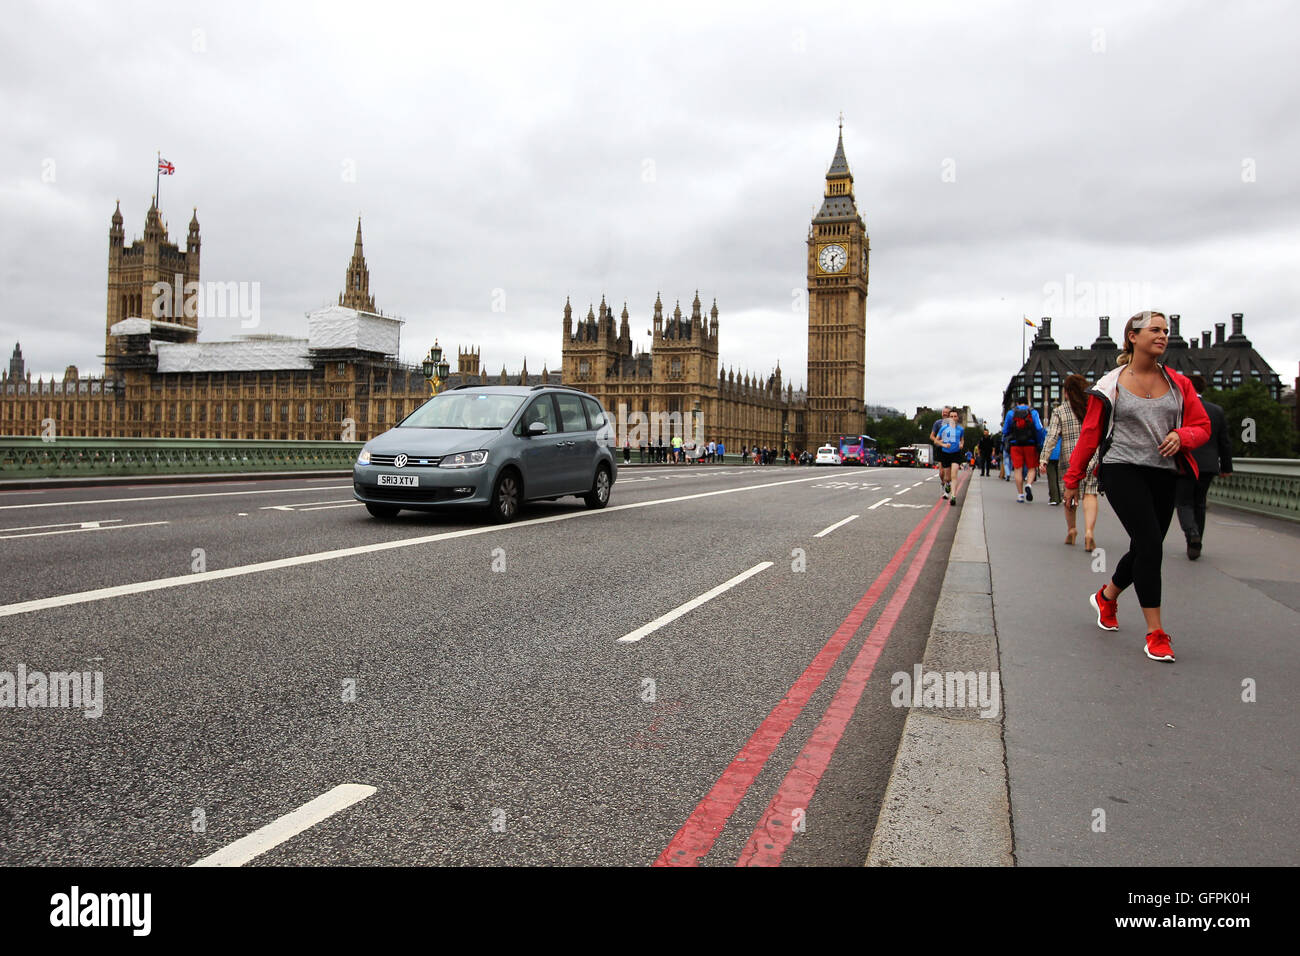 A unmarked emergency vehicle travels over Westminster bridge with the house of Parliament and Big Ben (Elizabeth Tower) in view Stock Photo